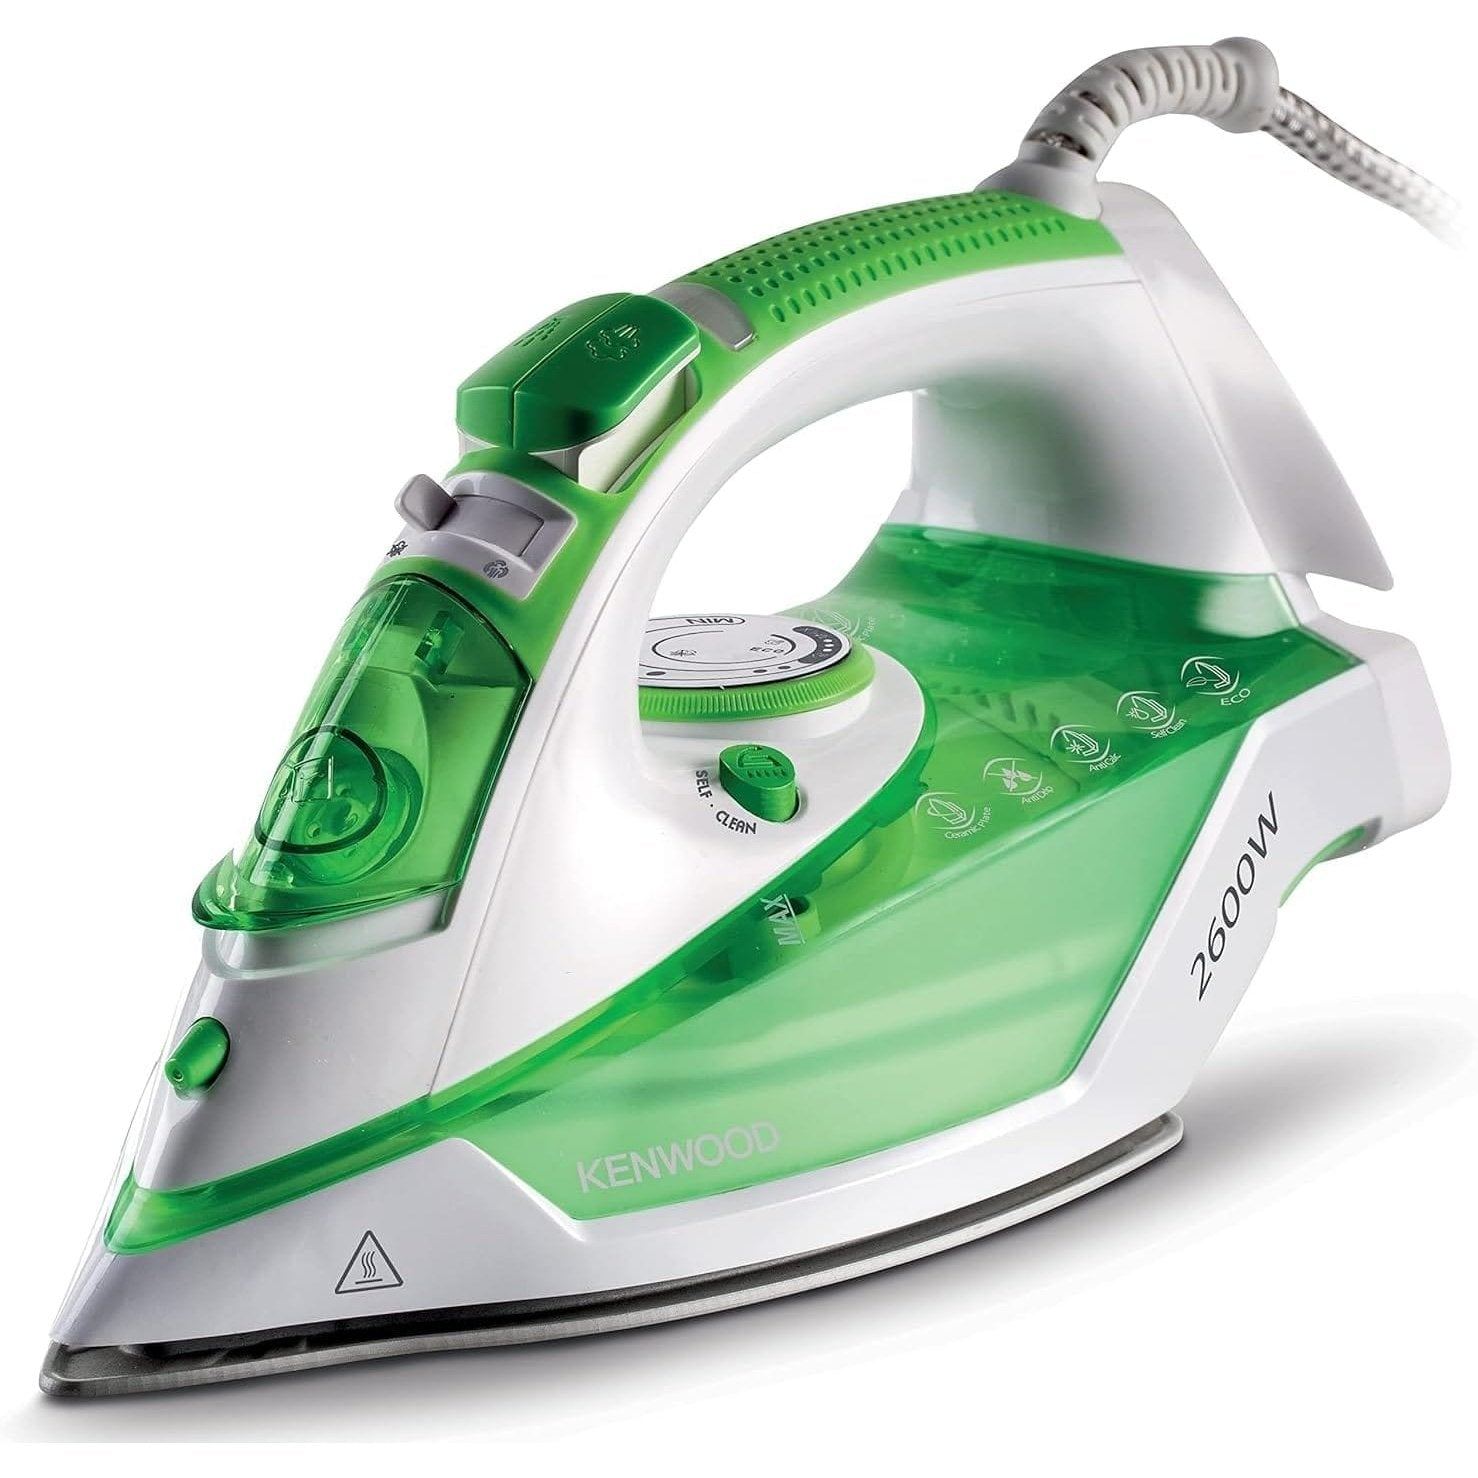 Kenwood Steam Iron 2600W - STP70 | Supply Master Accra, Ghana Electric Iron Buy Tools hardware Building materials